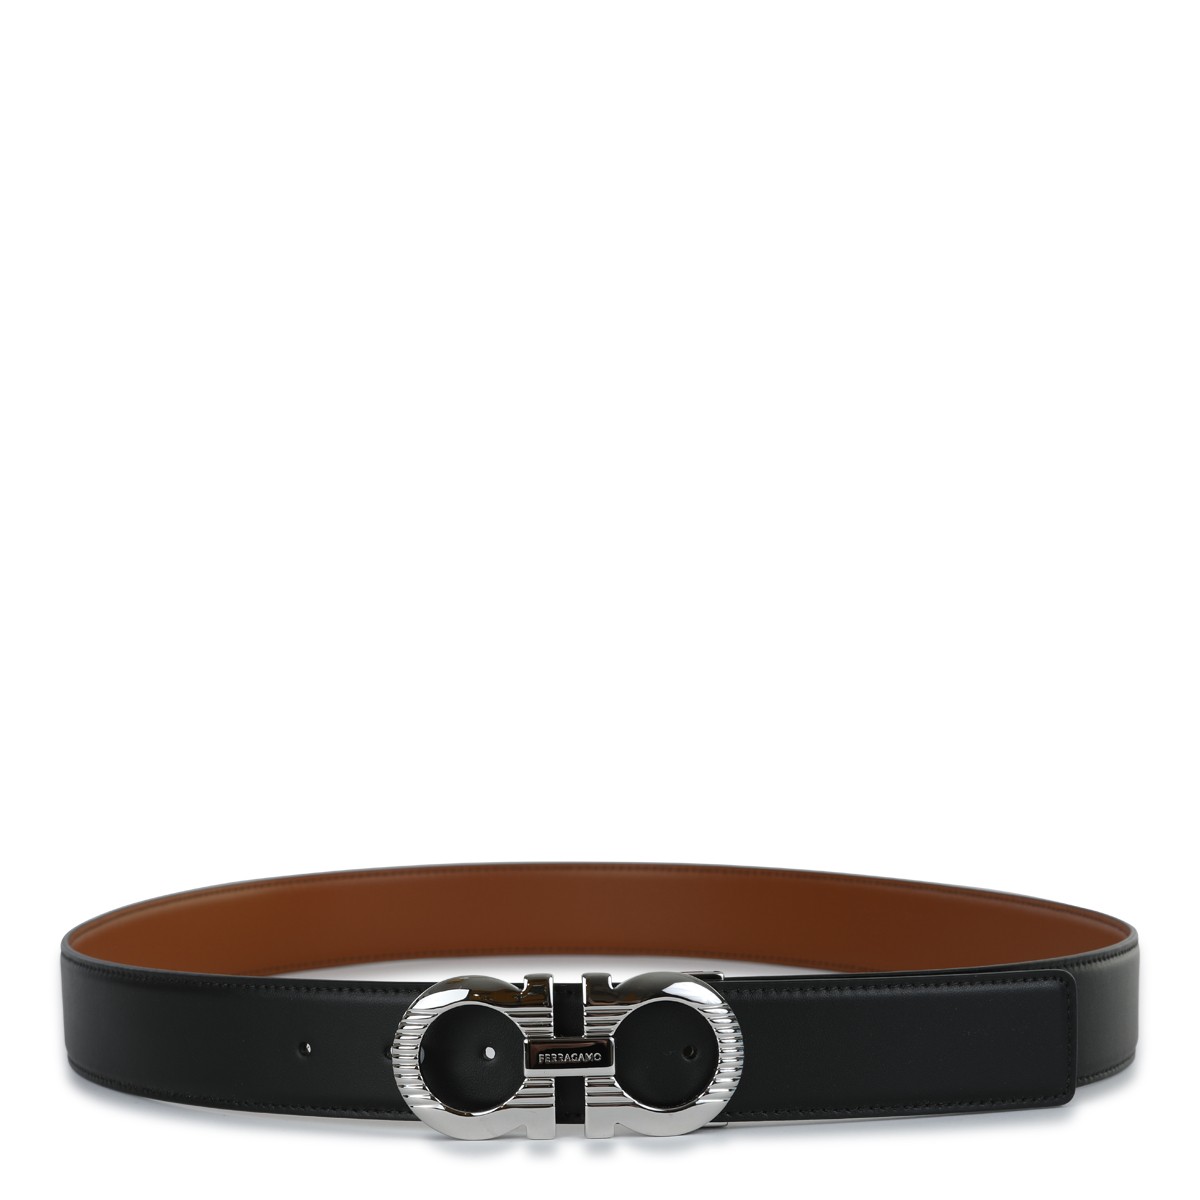 BLACK AND SILVER LEATHER GANCINI BELT